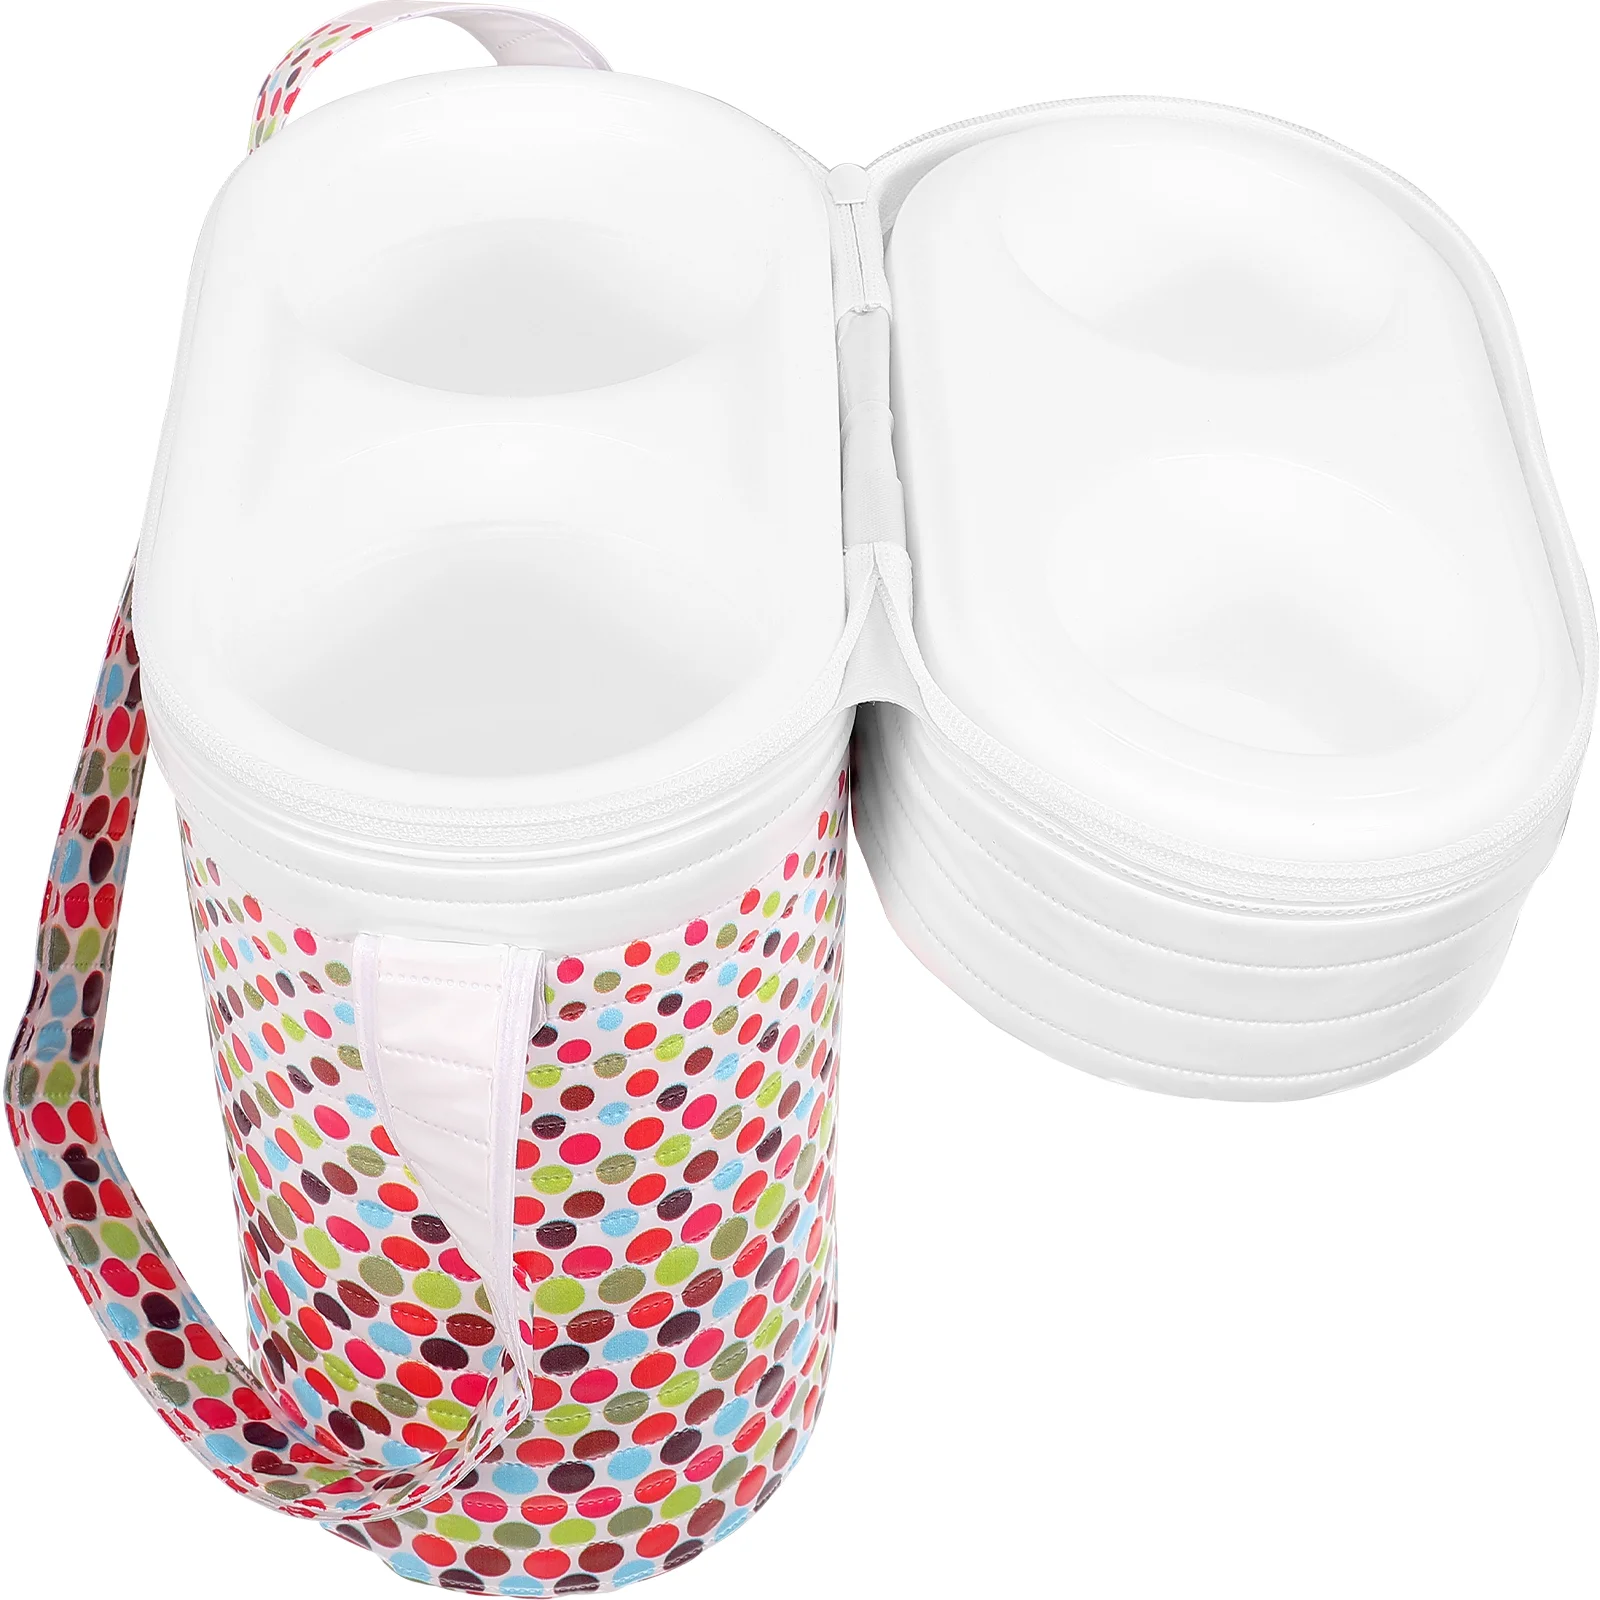 

Thermal Barrel Breast Feeding Essentials Insulated Bottle Bag Breastmilk Cooler Infant Travel Baby Bags